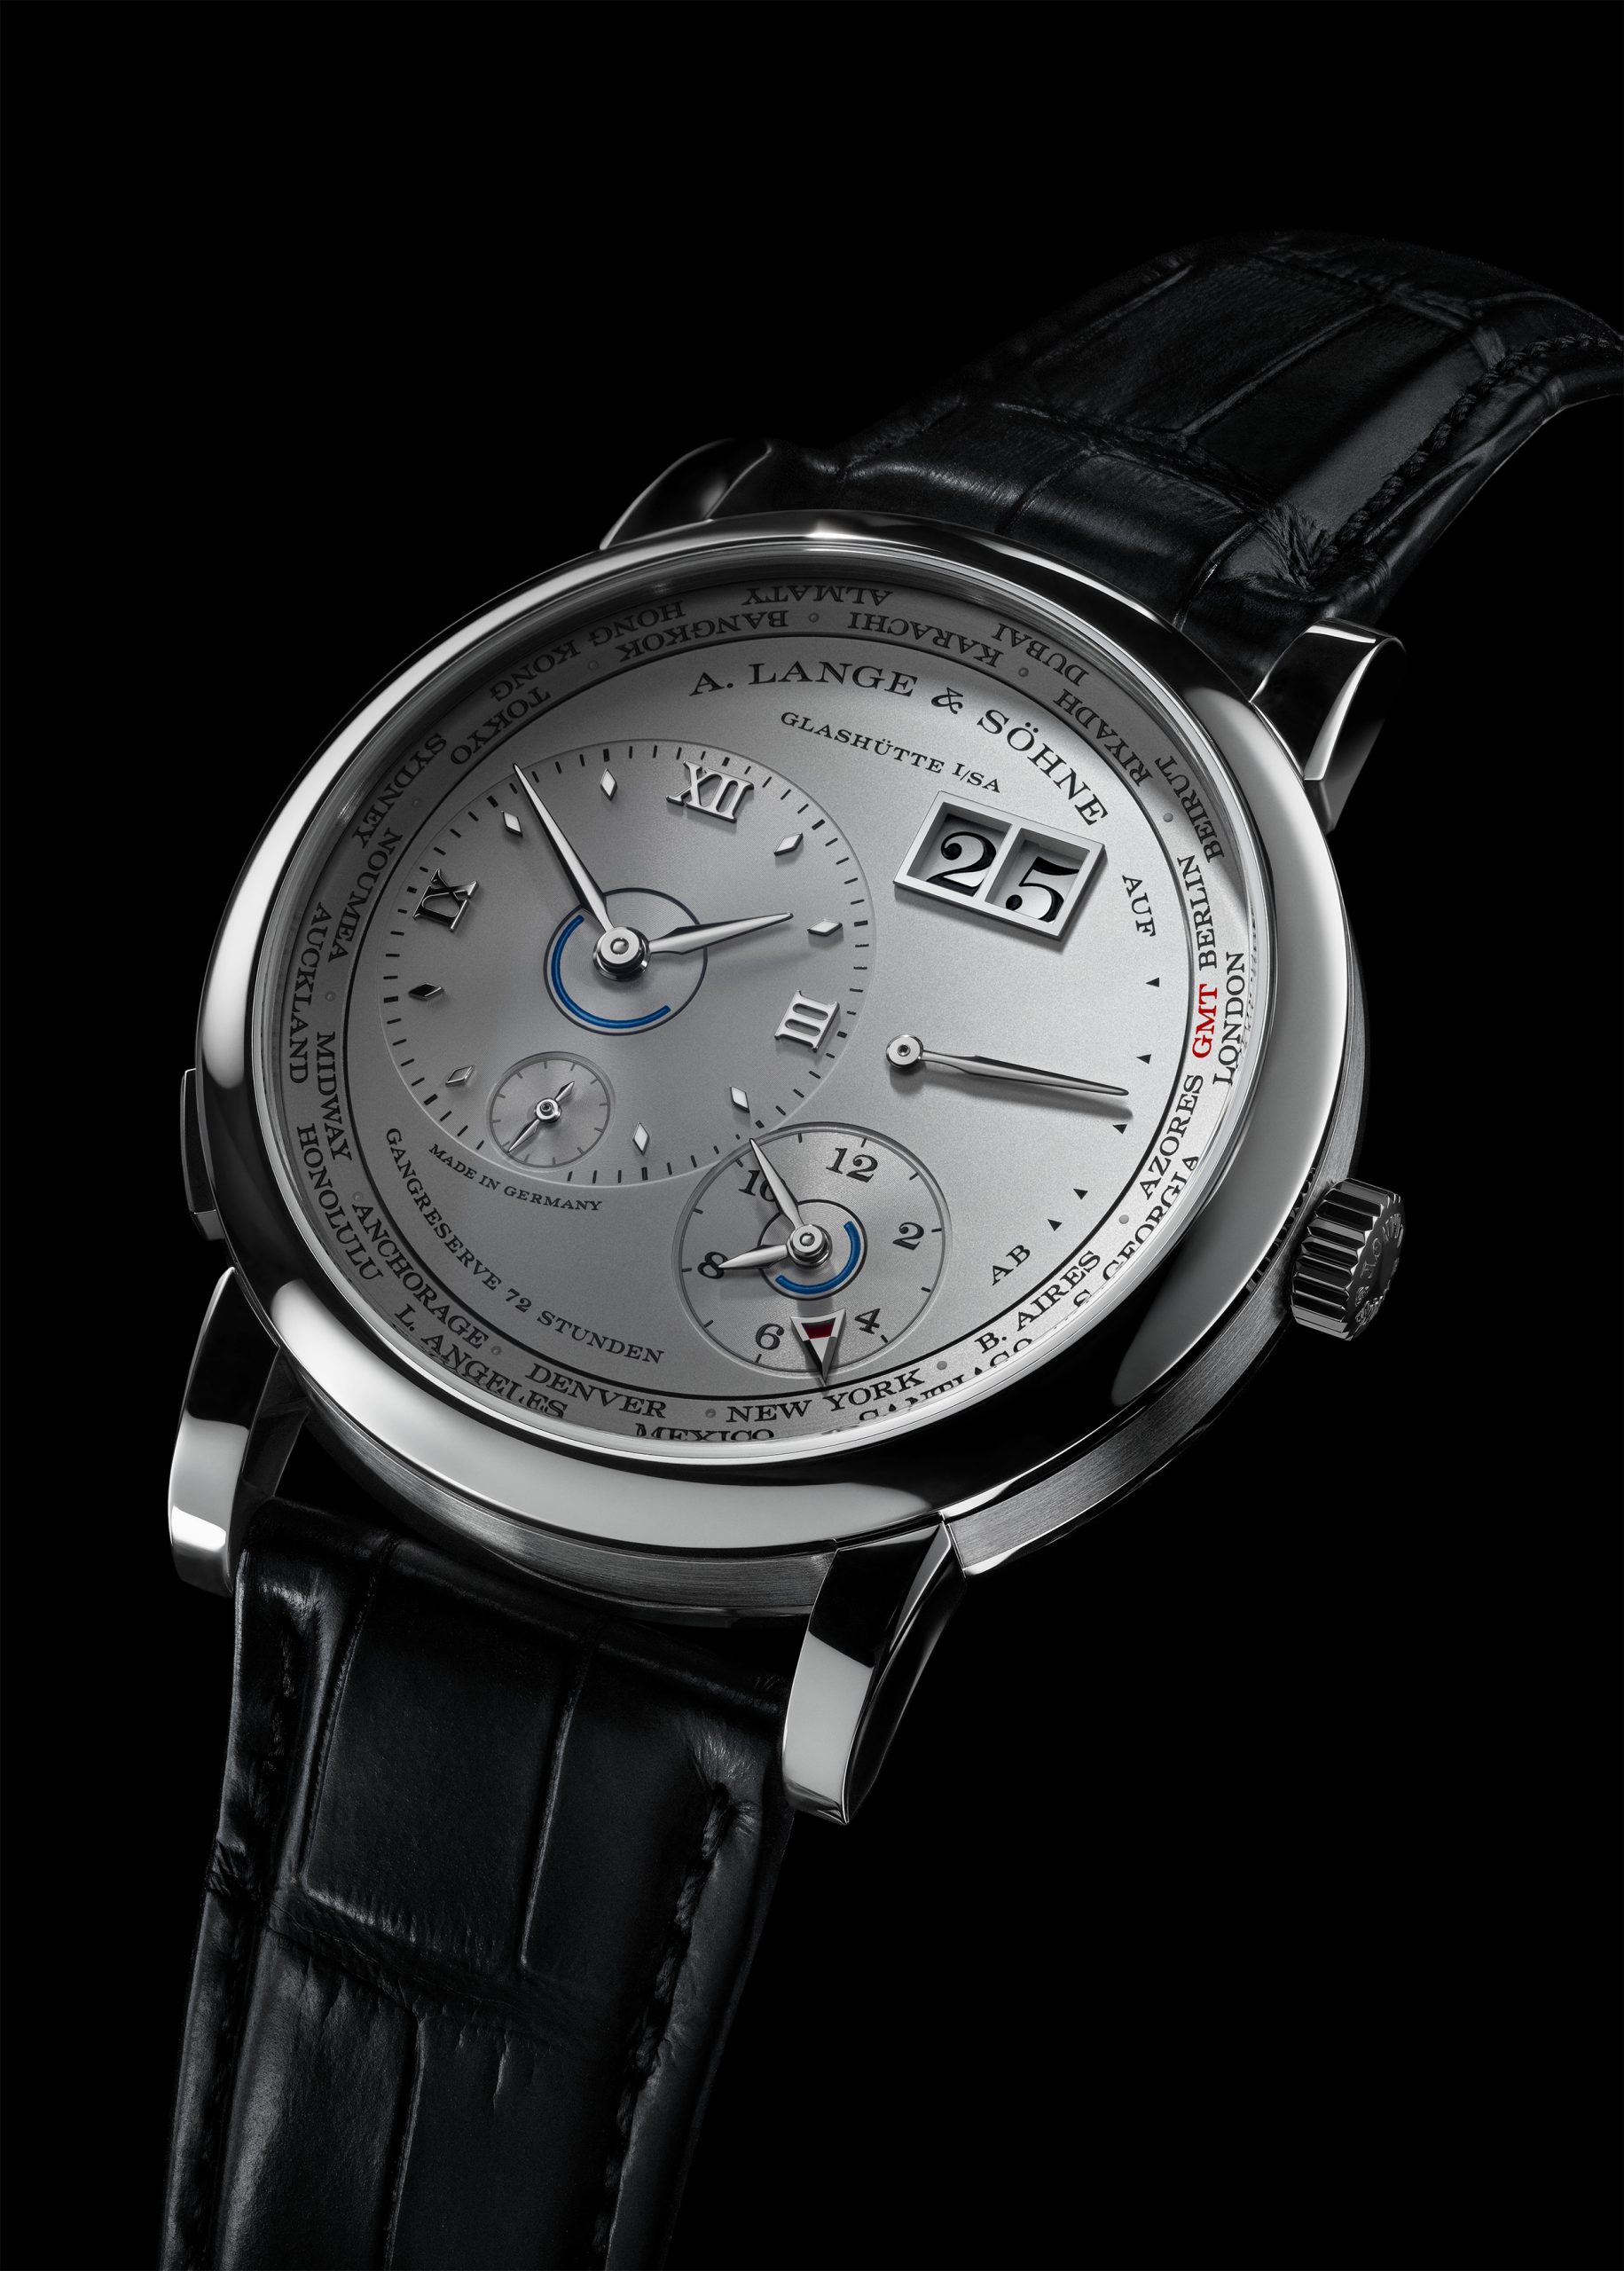 Traverse Continents with the A. Lange & Söhne Lange 1 Time Zone